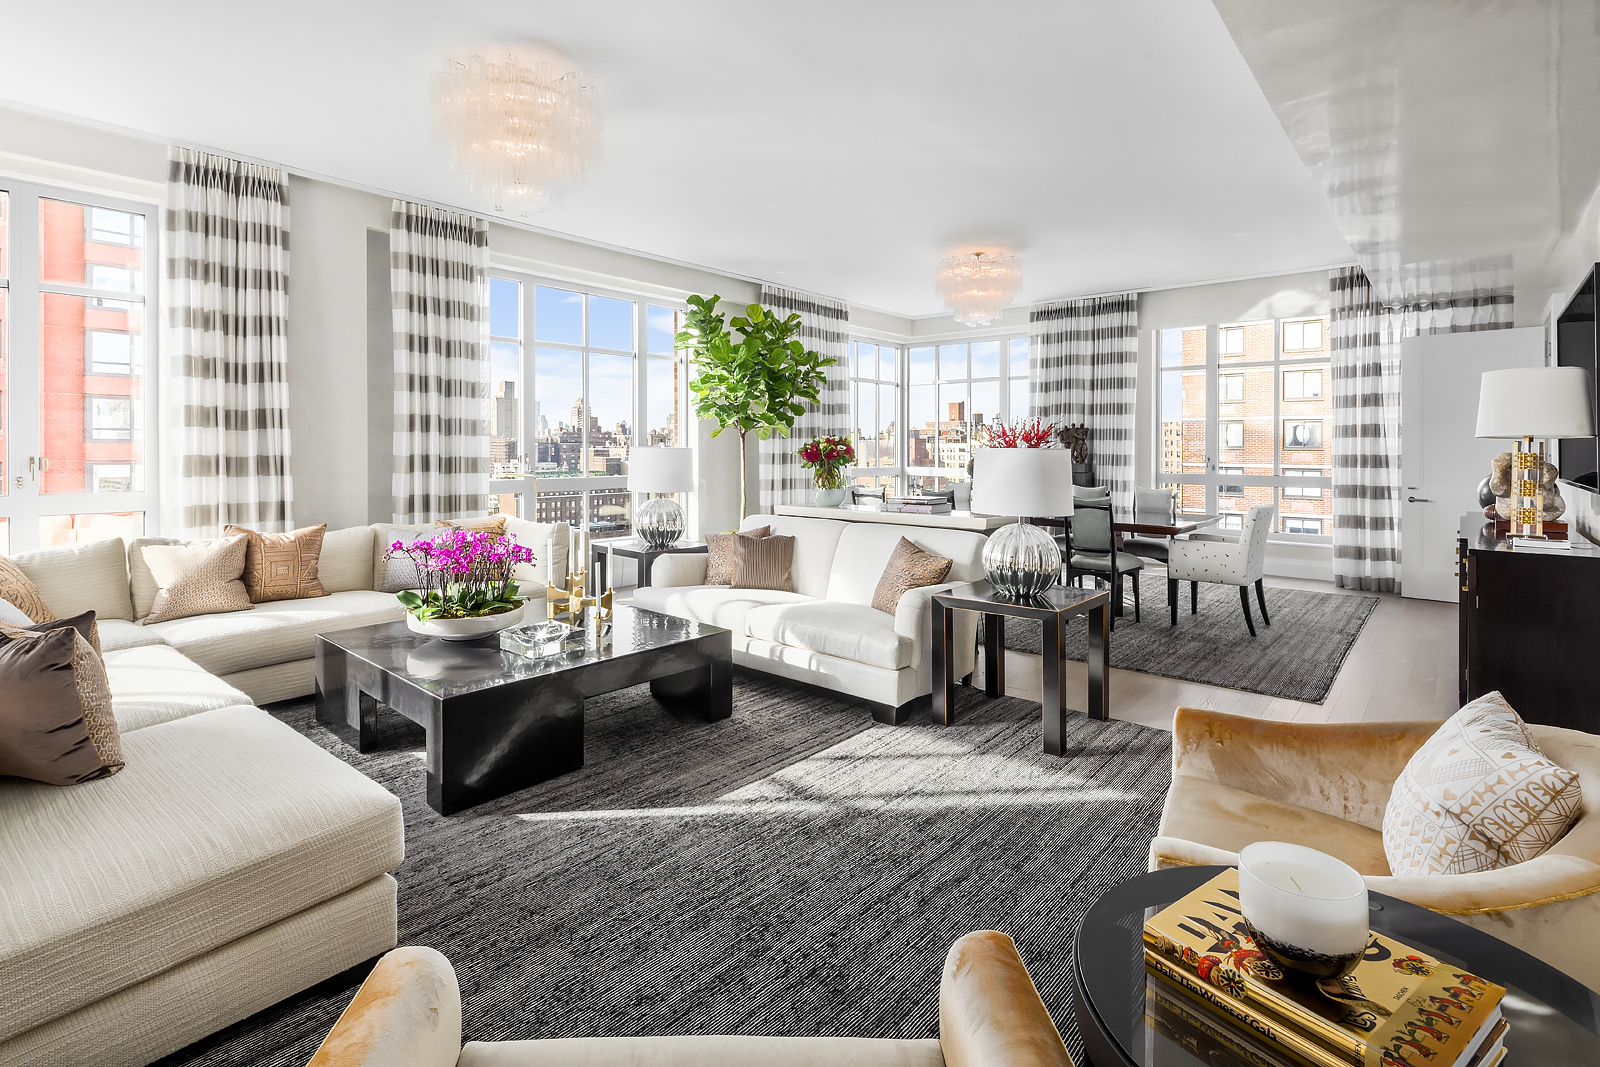 200 East 95th Street 19A, Yorkville, Upper East Side, NYC - 5 Bedrooms  
4.5 Bathrooms  
8 Rooms - 